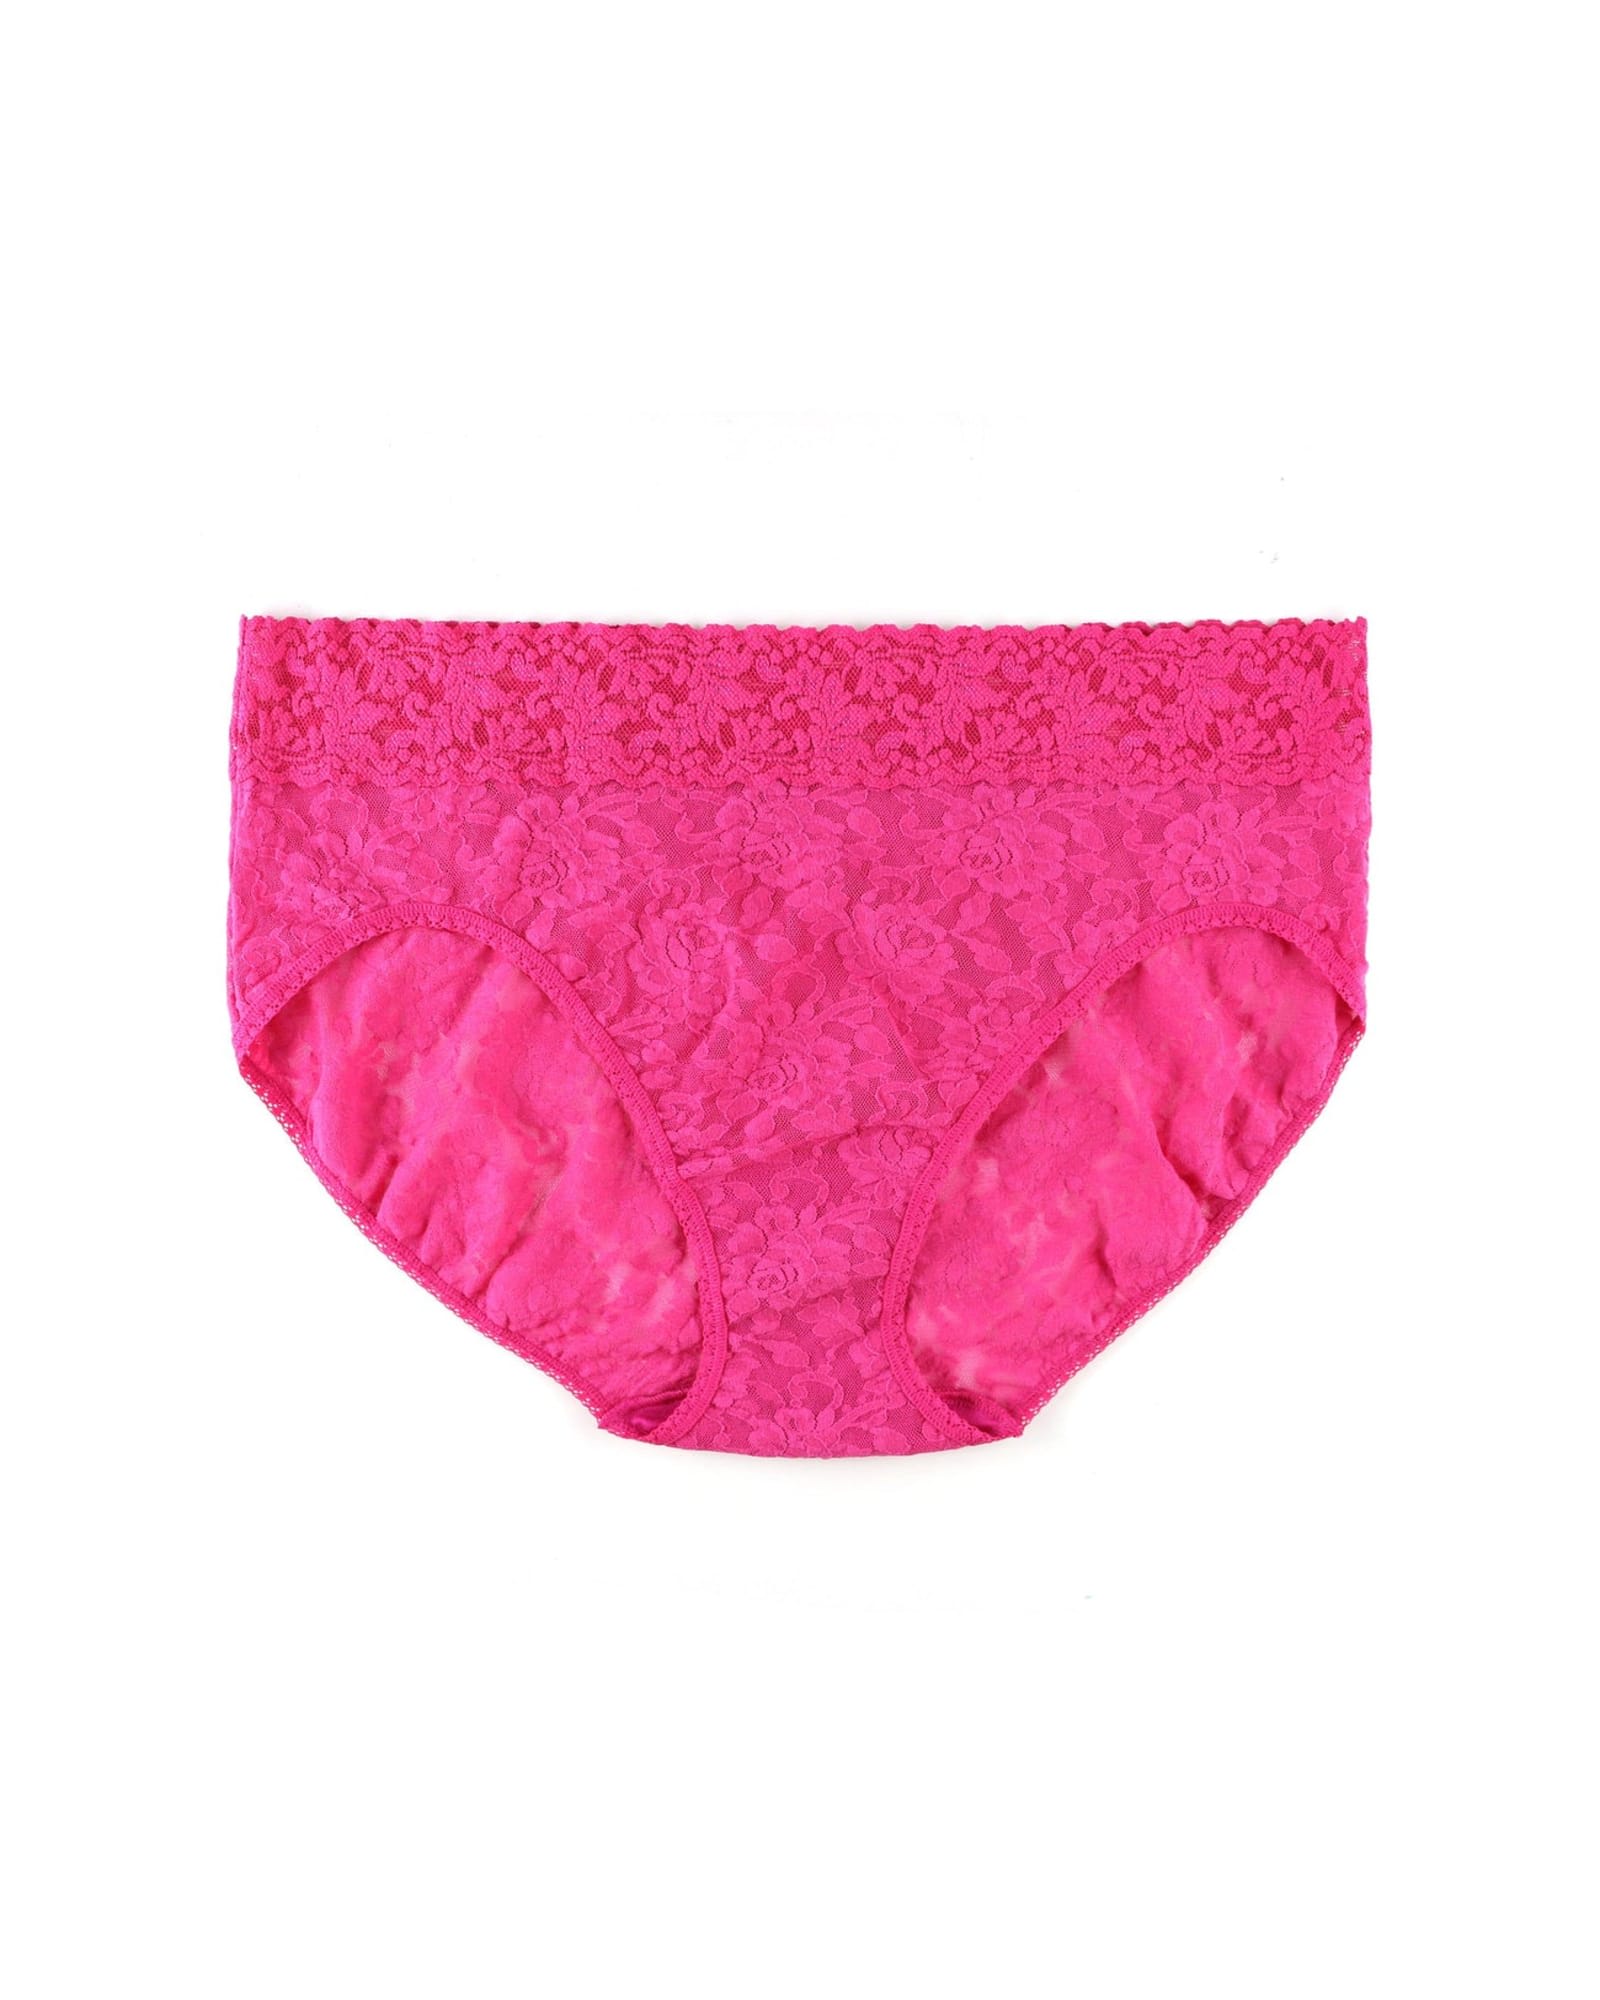 SIGNATURE LACE PLUS SIZE FRENCH BRIEF | INTP-INTUITION (PINK)